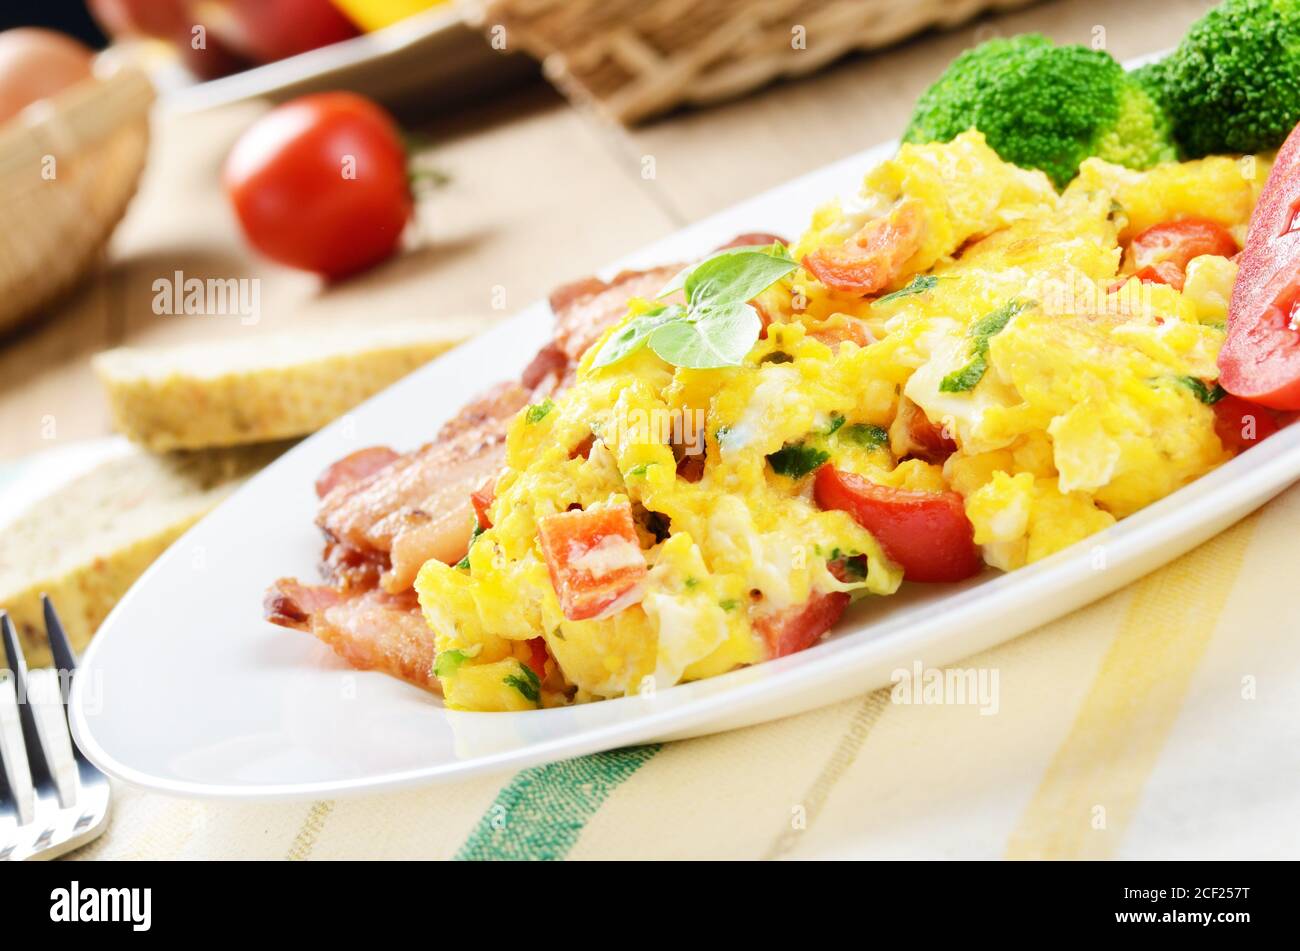 Omelet with vegetables, fried bacon and bread. Stock Photo